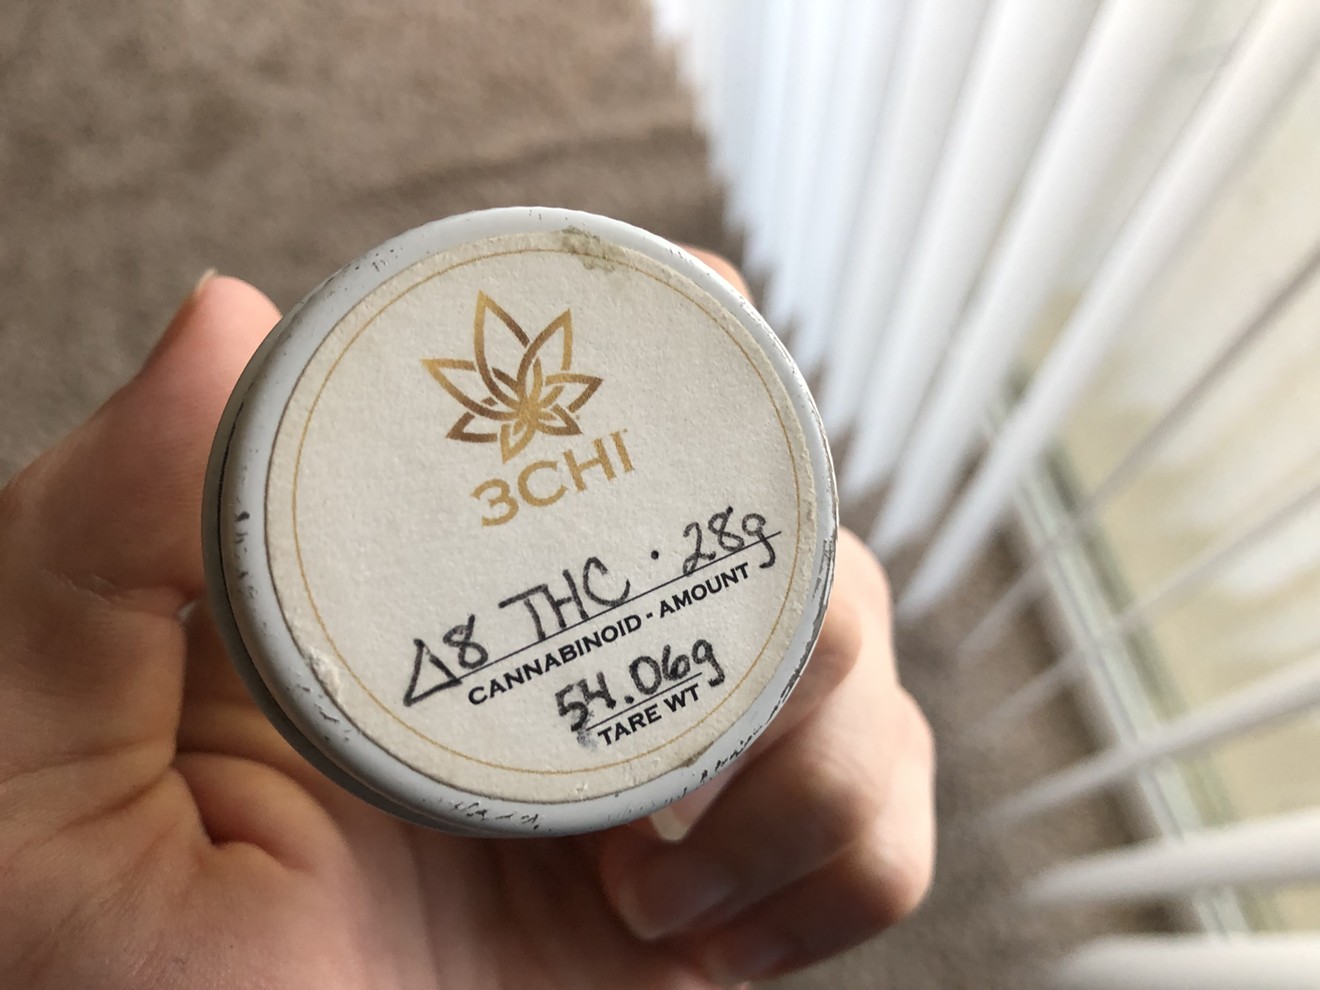 You can find delta-8 THC flower, gummies and vapes in hemp shops in Texas and across the U.S.